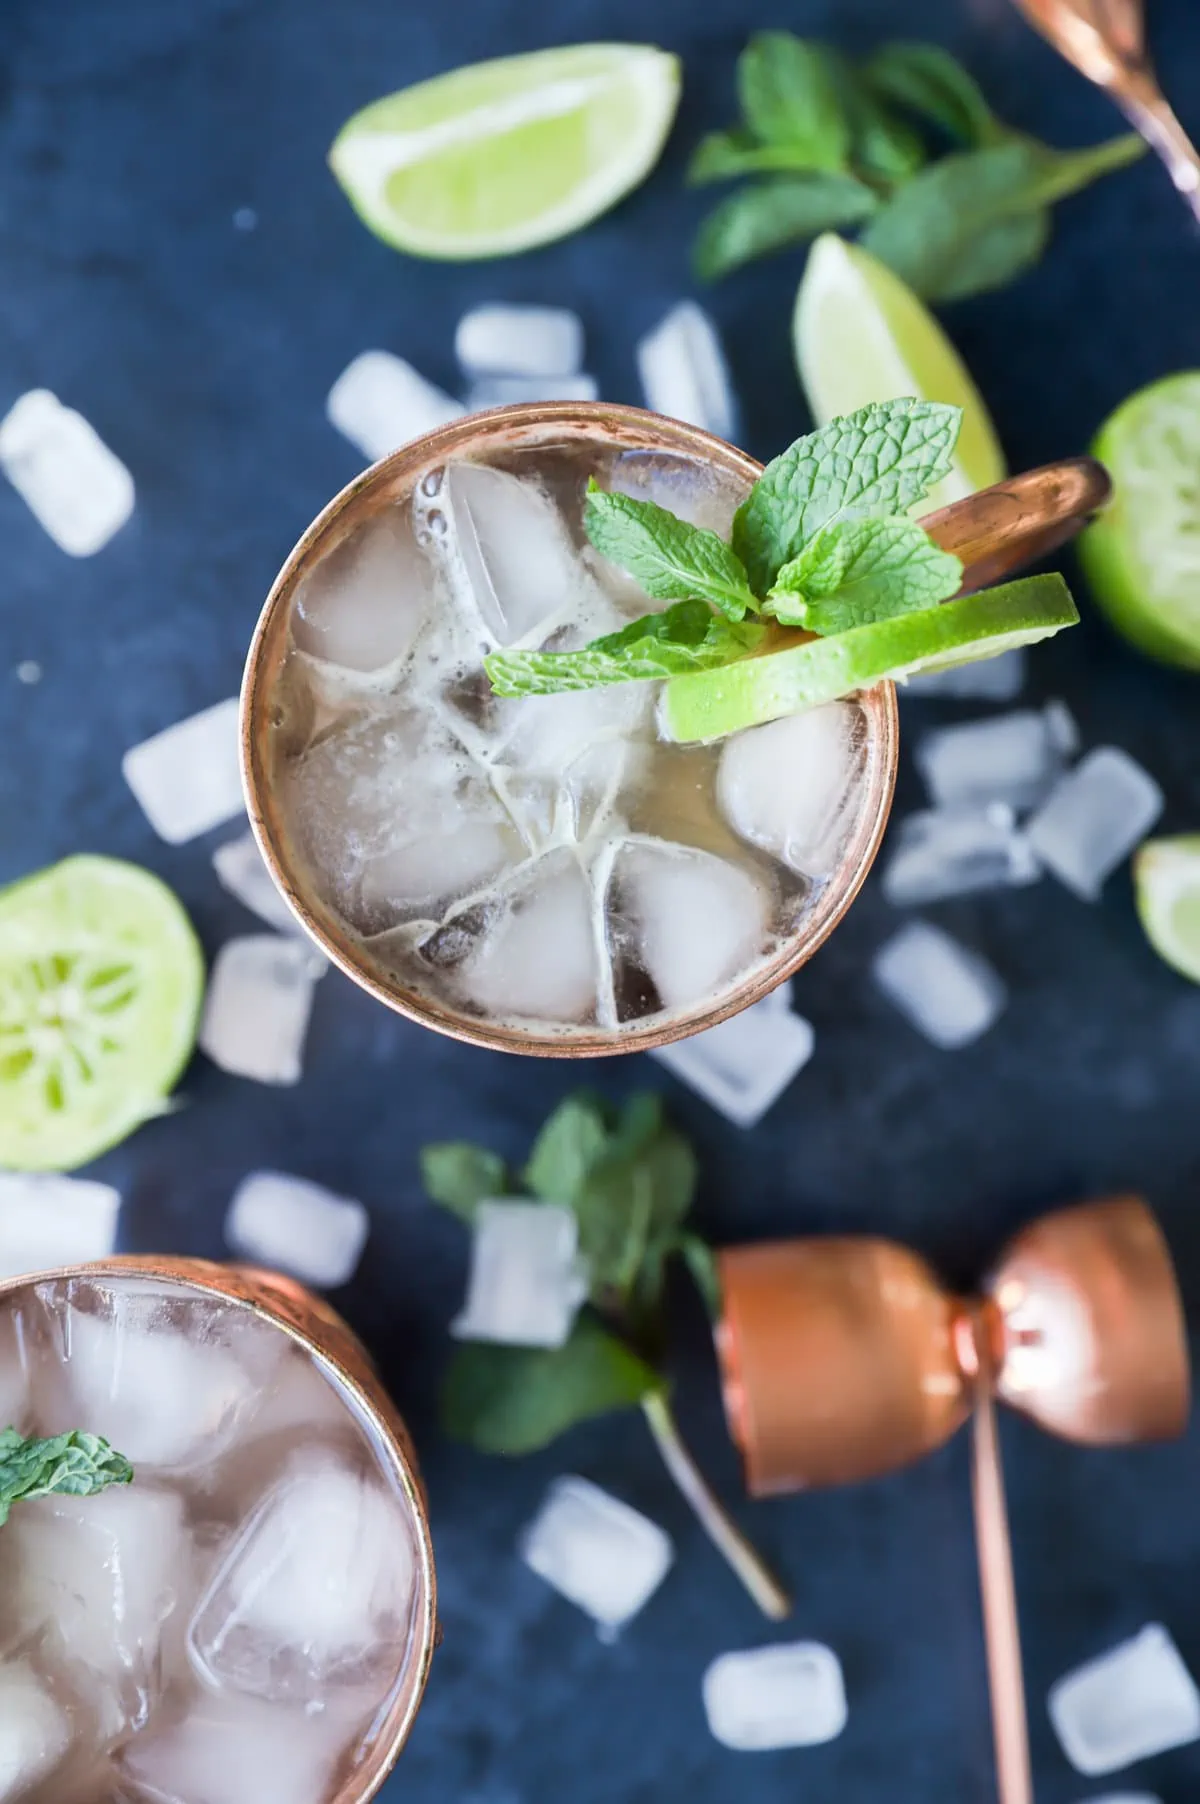 One of my favorite cocktails, the London Mule, is the subject of my tale  today. This drink is ideal for anyone seeking something refreshing…